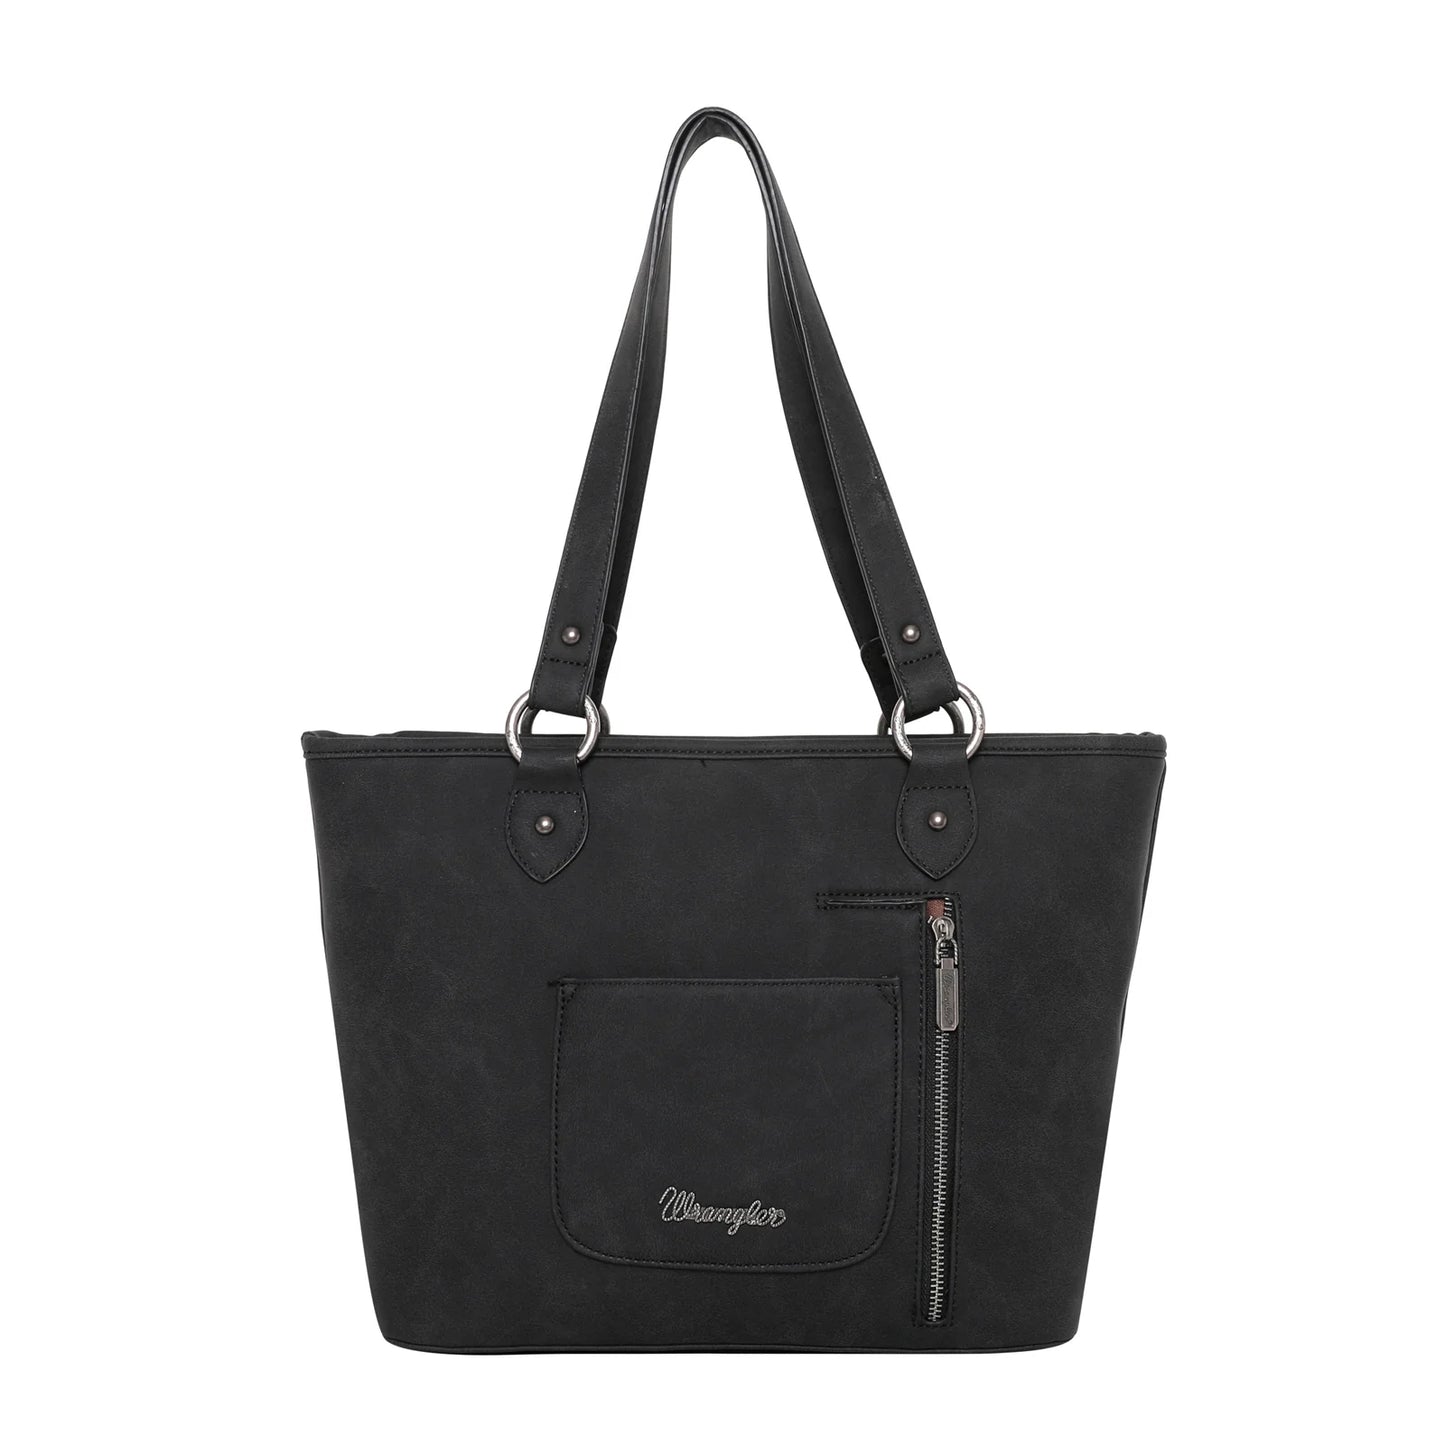 Concealed Carry Wrangler Tote Bag    *2 Colors avail*